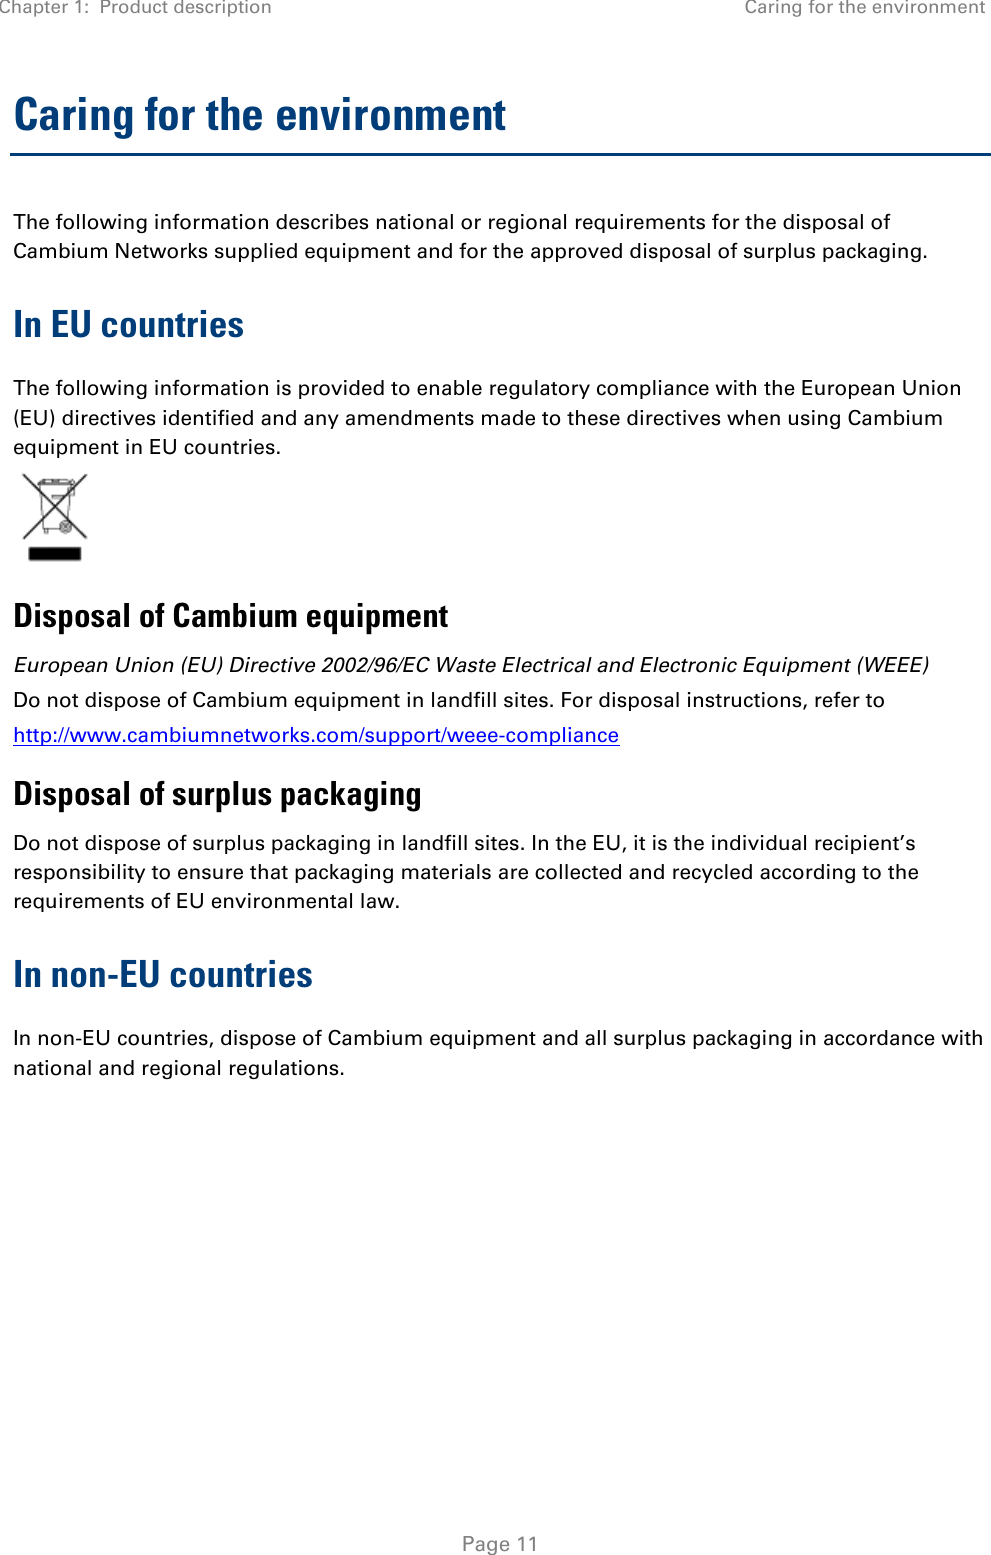 Chapter 1:  Product description Caring for the environment   Page 11 Caring for the environment The following information describes national or regional requirements for the disposal of Cambium Networks supplied equipment and for the approved disposal of surplus packaging. In EU countries The following information is provided to enable regulatory compliance with the European Union (EU) directives identified and any amendments made to these directives when using Cambium equipment in EU countries.  Disposal of Cambium equipment European Union (EU) Directive 2002/96/EC Waste Electrical and Electronic Equipment (WEEE) Do not dispose of Cambium equipment in landfill sites. For disposal instructions, refer to  http://www.cambiumnetworks.com/support/weee-compliance Disposal of surplus packaging Do not dispose of surplus packaging in landfill sites. In the EU, it is the individual recipient’s responsibility to ensure that packaging materials are collected and recycled according to the requirements of EU environmental law. In non-EU countries In non-EU countries, dispose of Cambium equipment and all surplus packaging in accordance with national and regional regulations.  